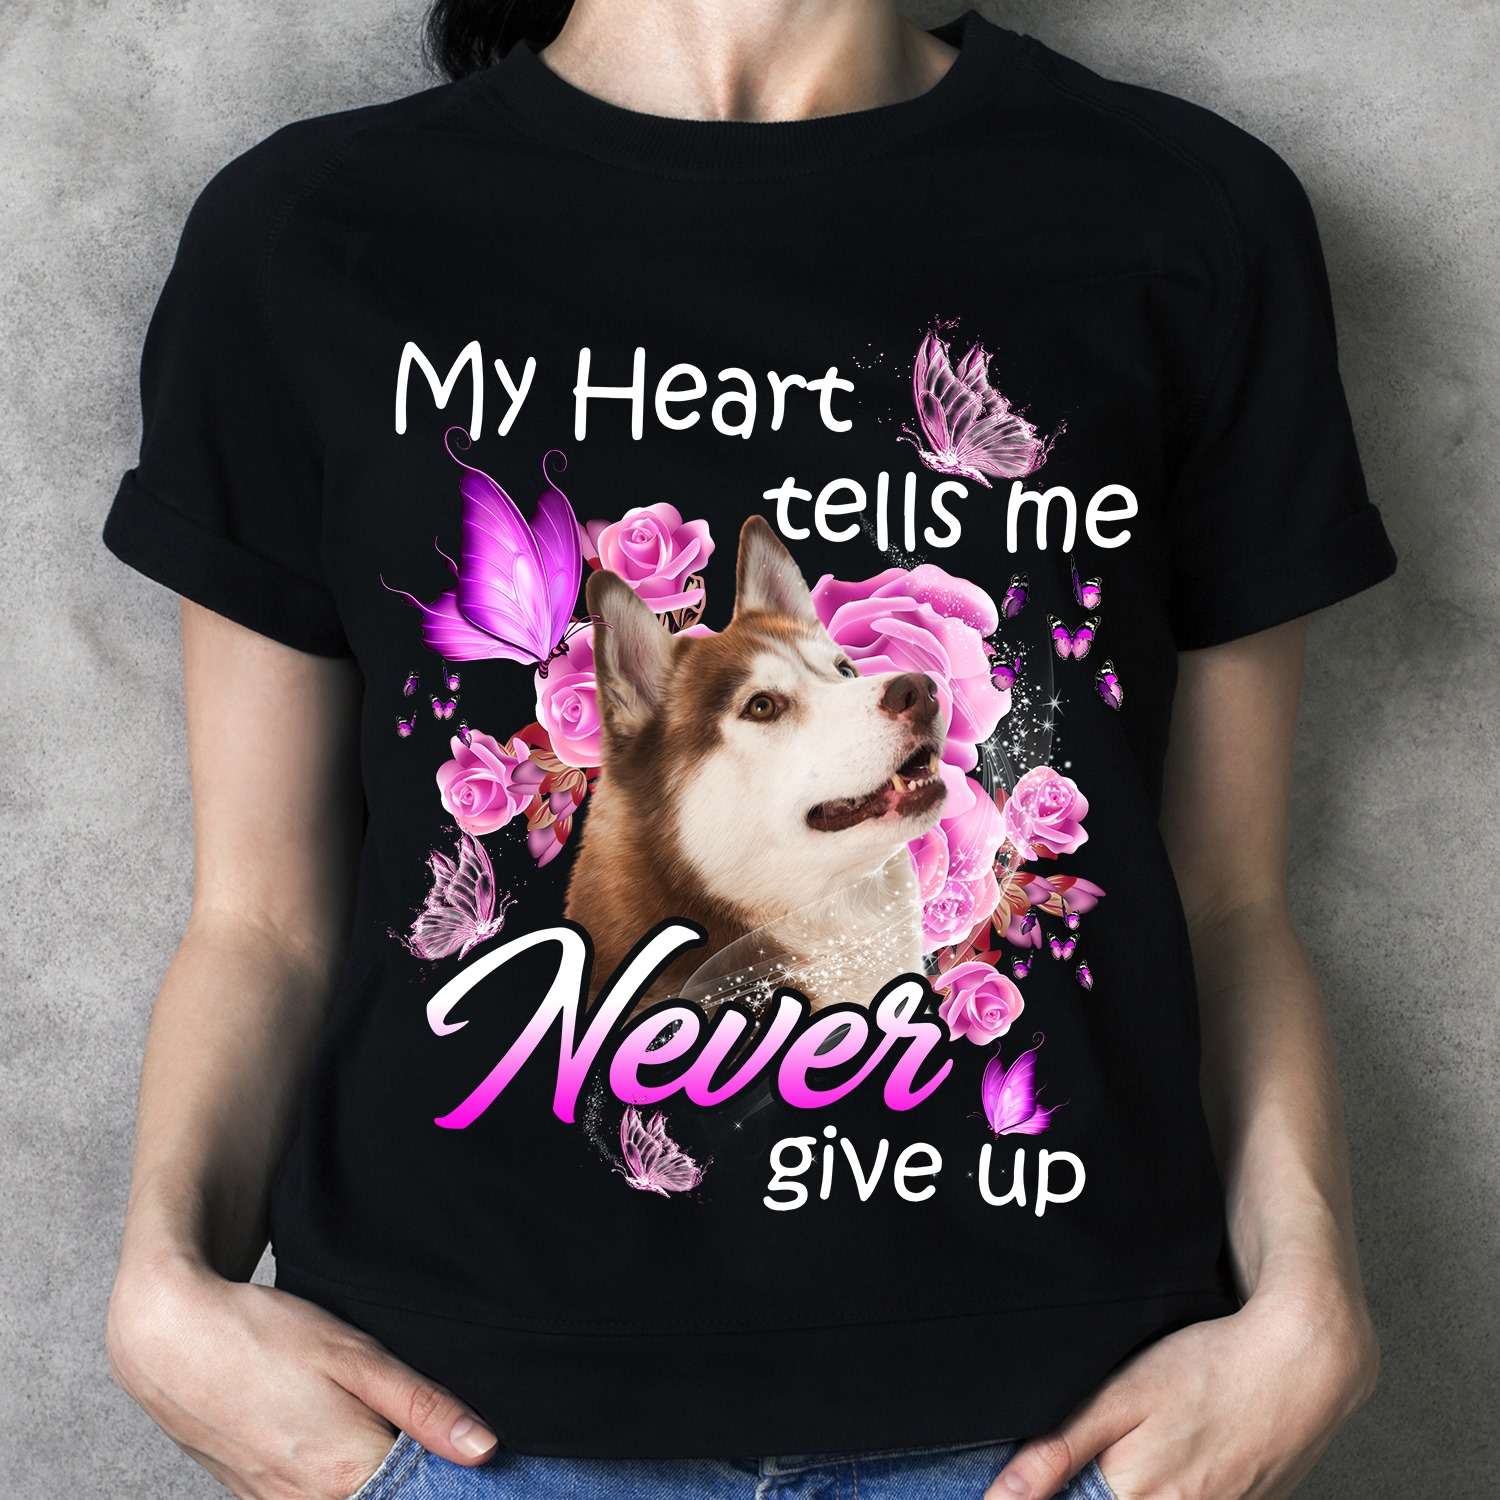 My heart tells me never give up - Alaska dog and butterflies, gift for dog lover